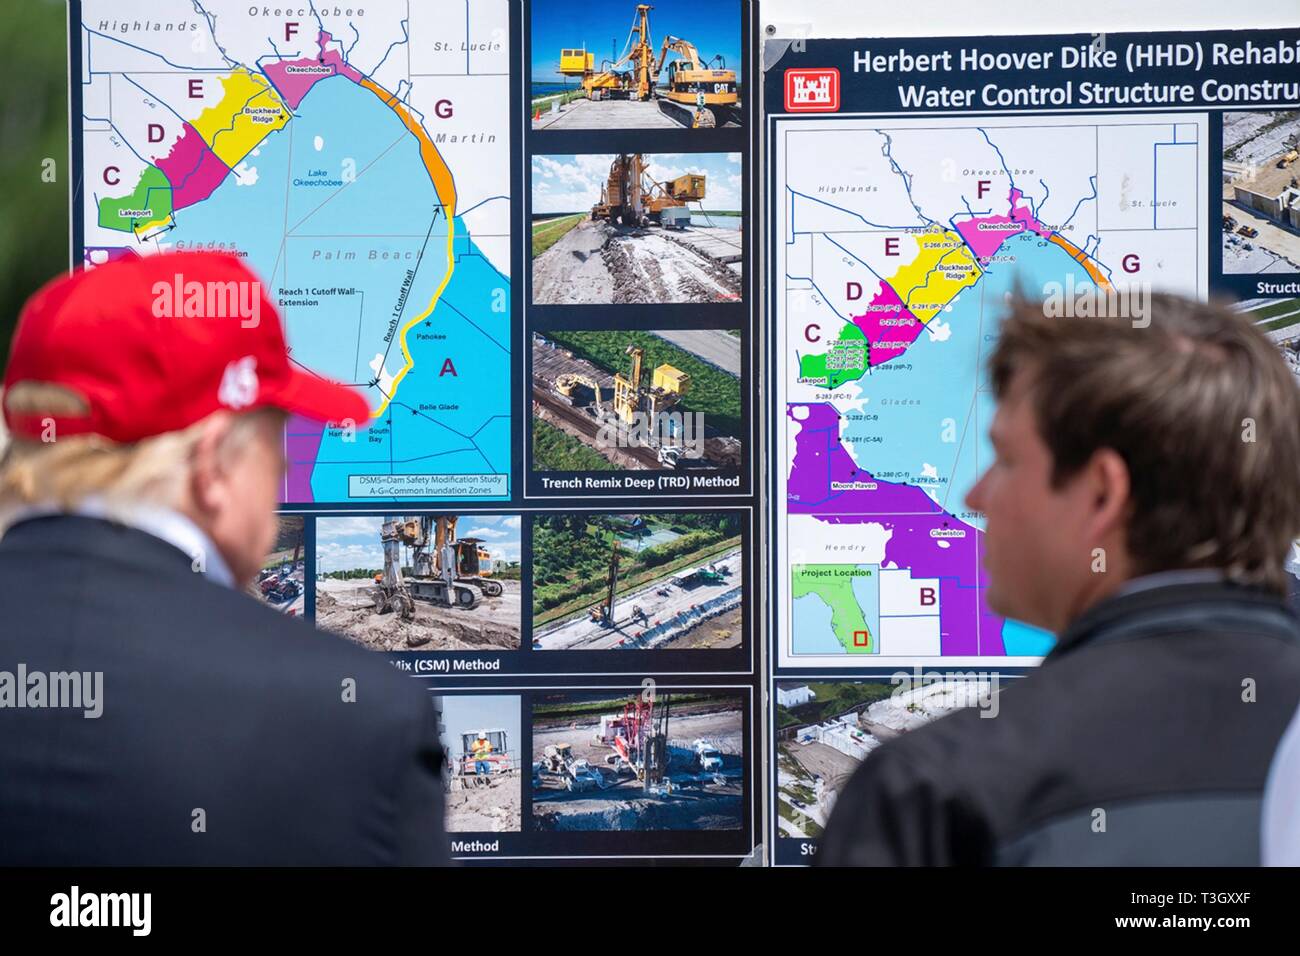 U.S President Donald Trump, left, listens to a presentation on the Herbert Hoover Dike during a visit to Lake Okeechobee with Florida Gov. Ron DeSantis, Sen. Marco Rubio, and Sen. Rick Scott March 29, 2019 in Canal Point, Florida. The Herbert Hoover Dike is a 143-mile earthen dam that surrounds Lake Okeechobee and currently under a massive renovation and repair project. Stock Photo